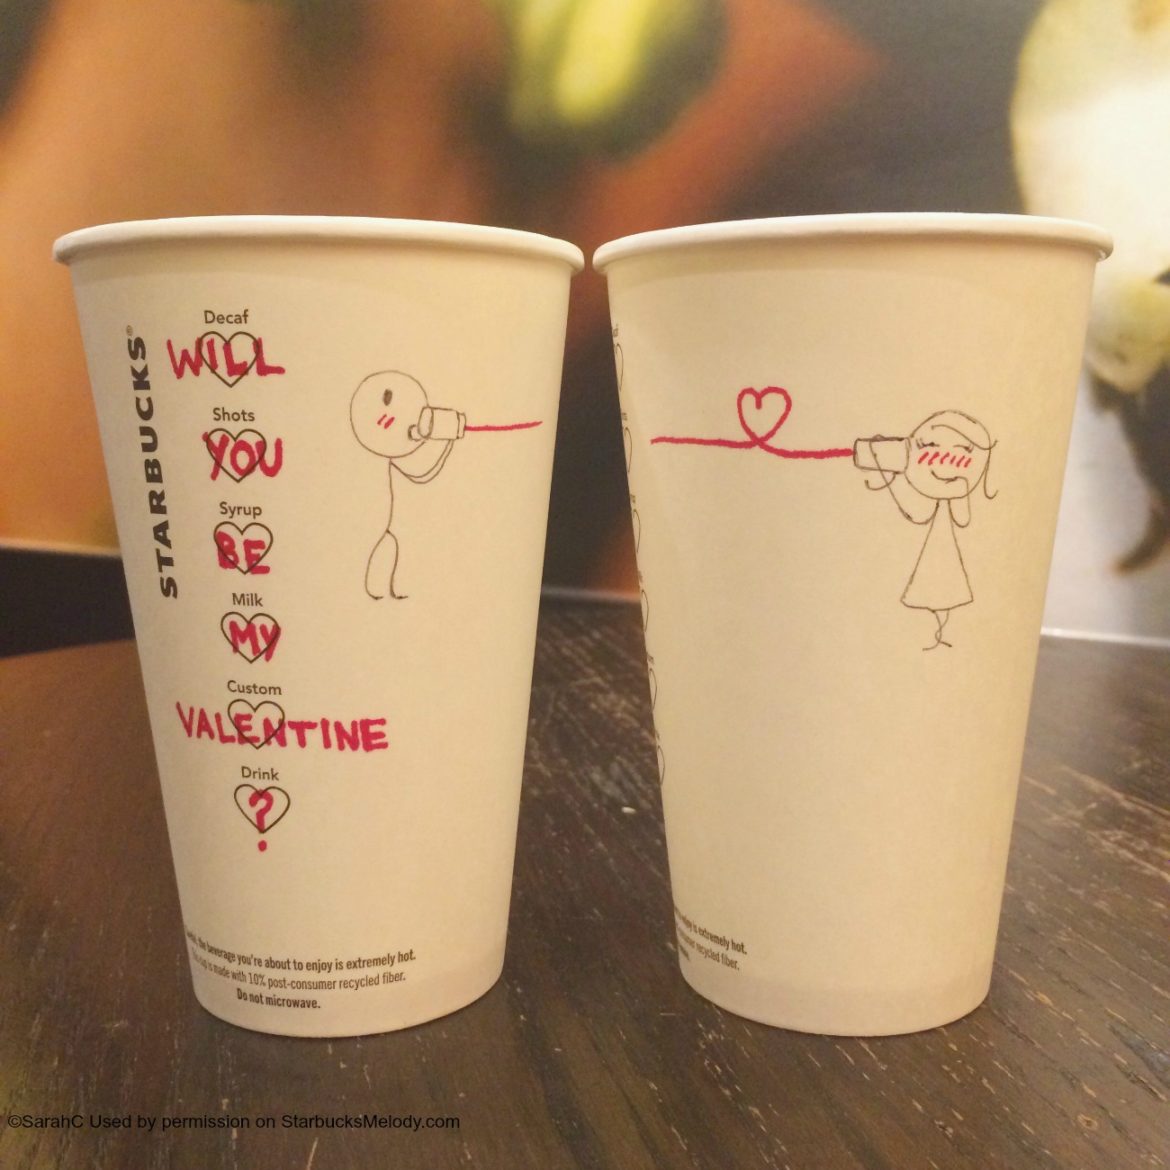 Be on the look out for super cute Starbucks Valentine’s Day cups!